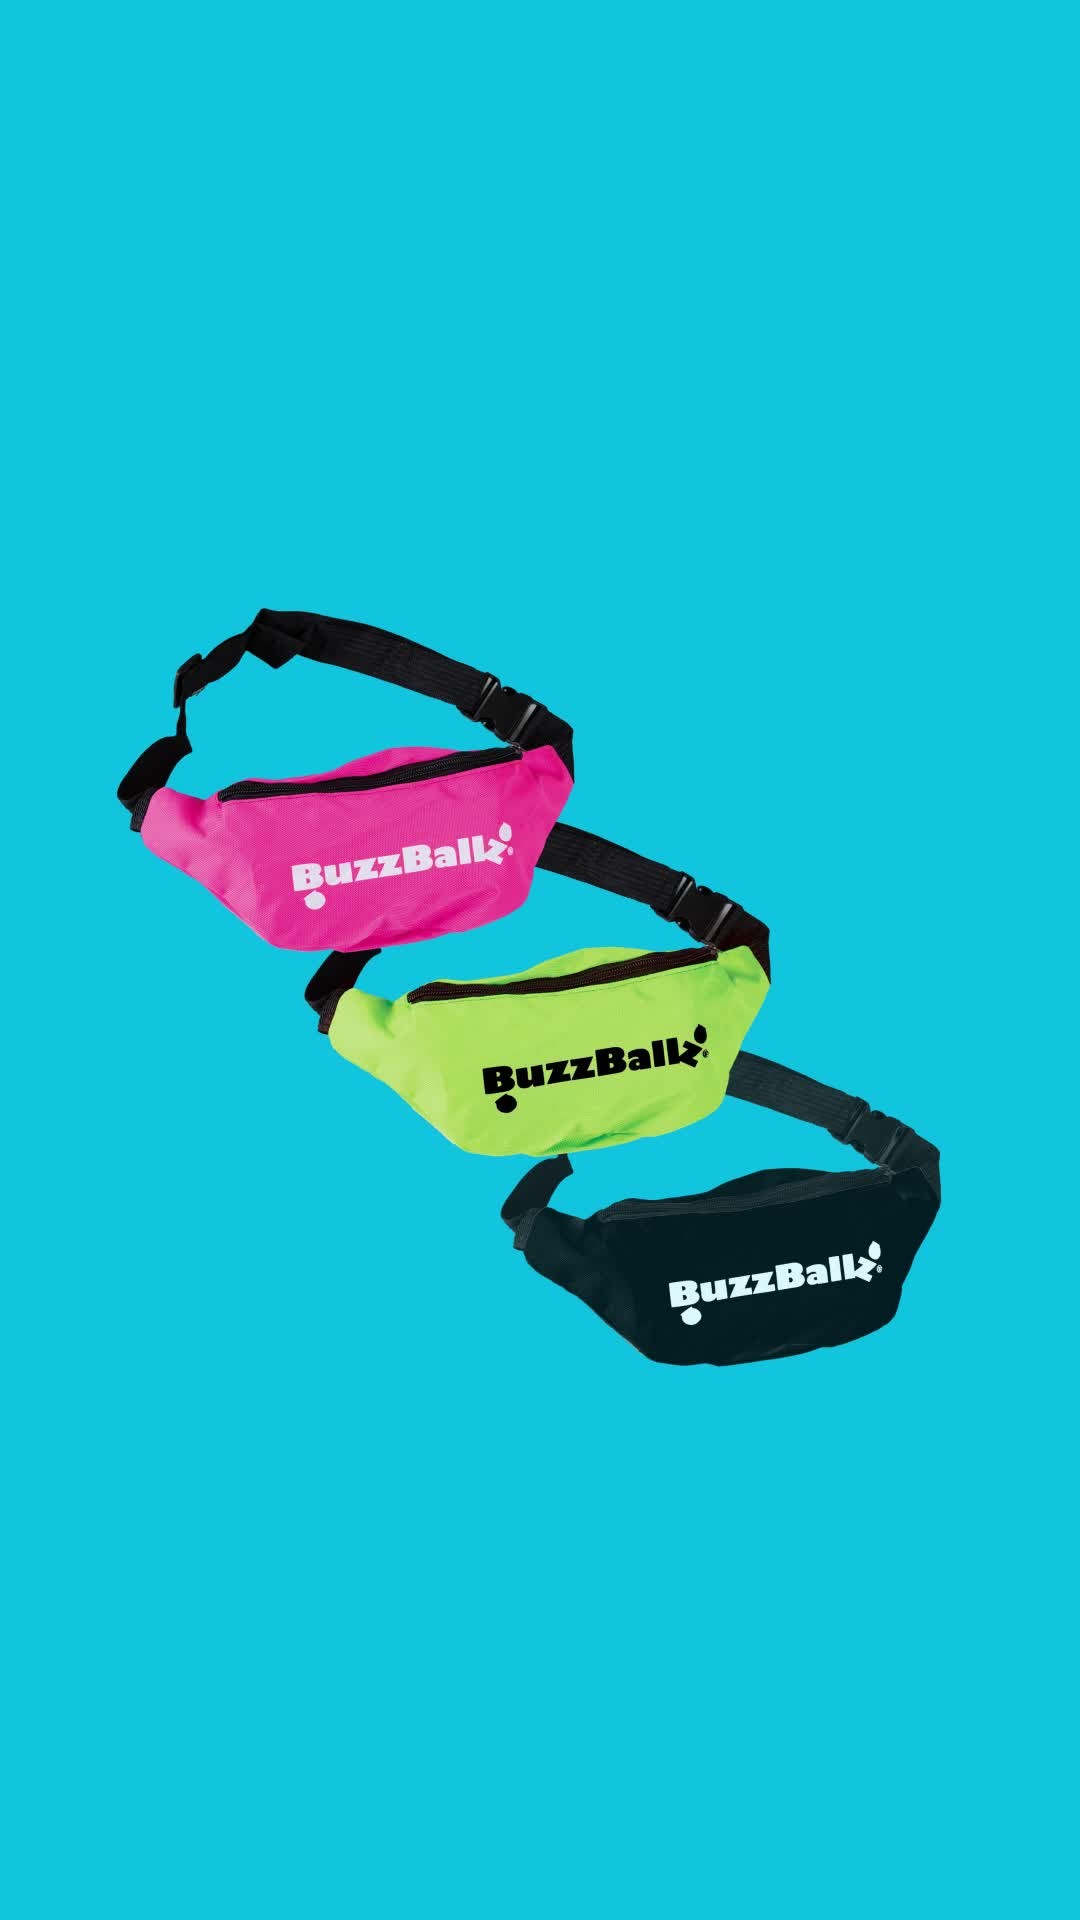 We keep hearing how much you love BuzzBallz, but we want everyone to know! Head to our website and leave us a review about your favorite flavor. The first 50 to leave a review and DM us proof will receive a BuzzBallz fanny pack on us  One review per entry, must be 21+ to participate.